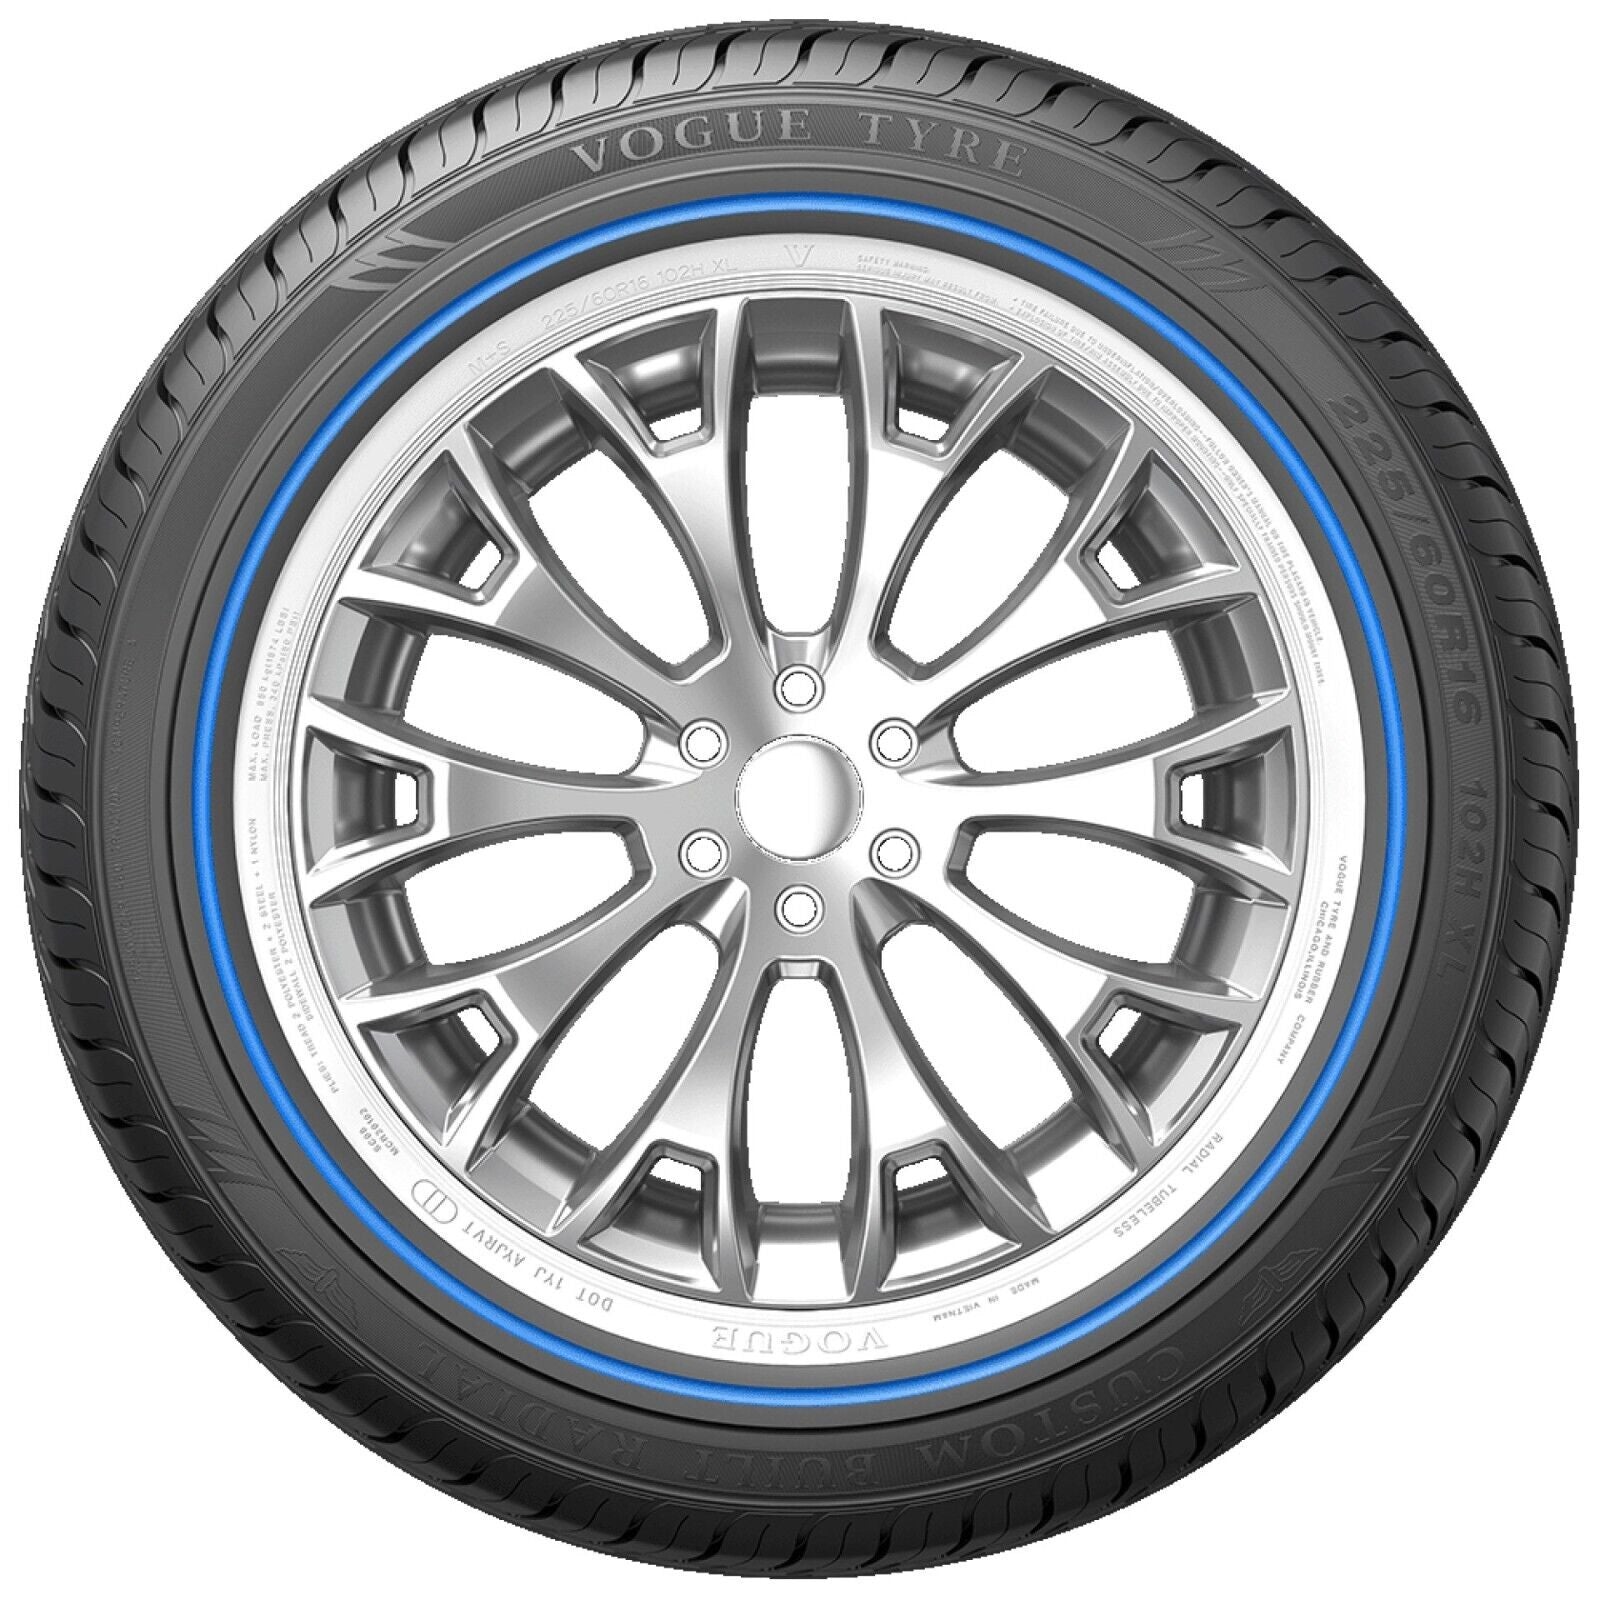 VOGUE TYRE LIMITED EDITION 245-45R19 BLUE AND WHITE SET OF 4 TIRES